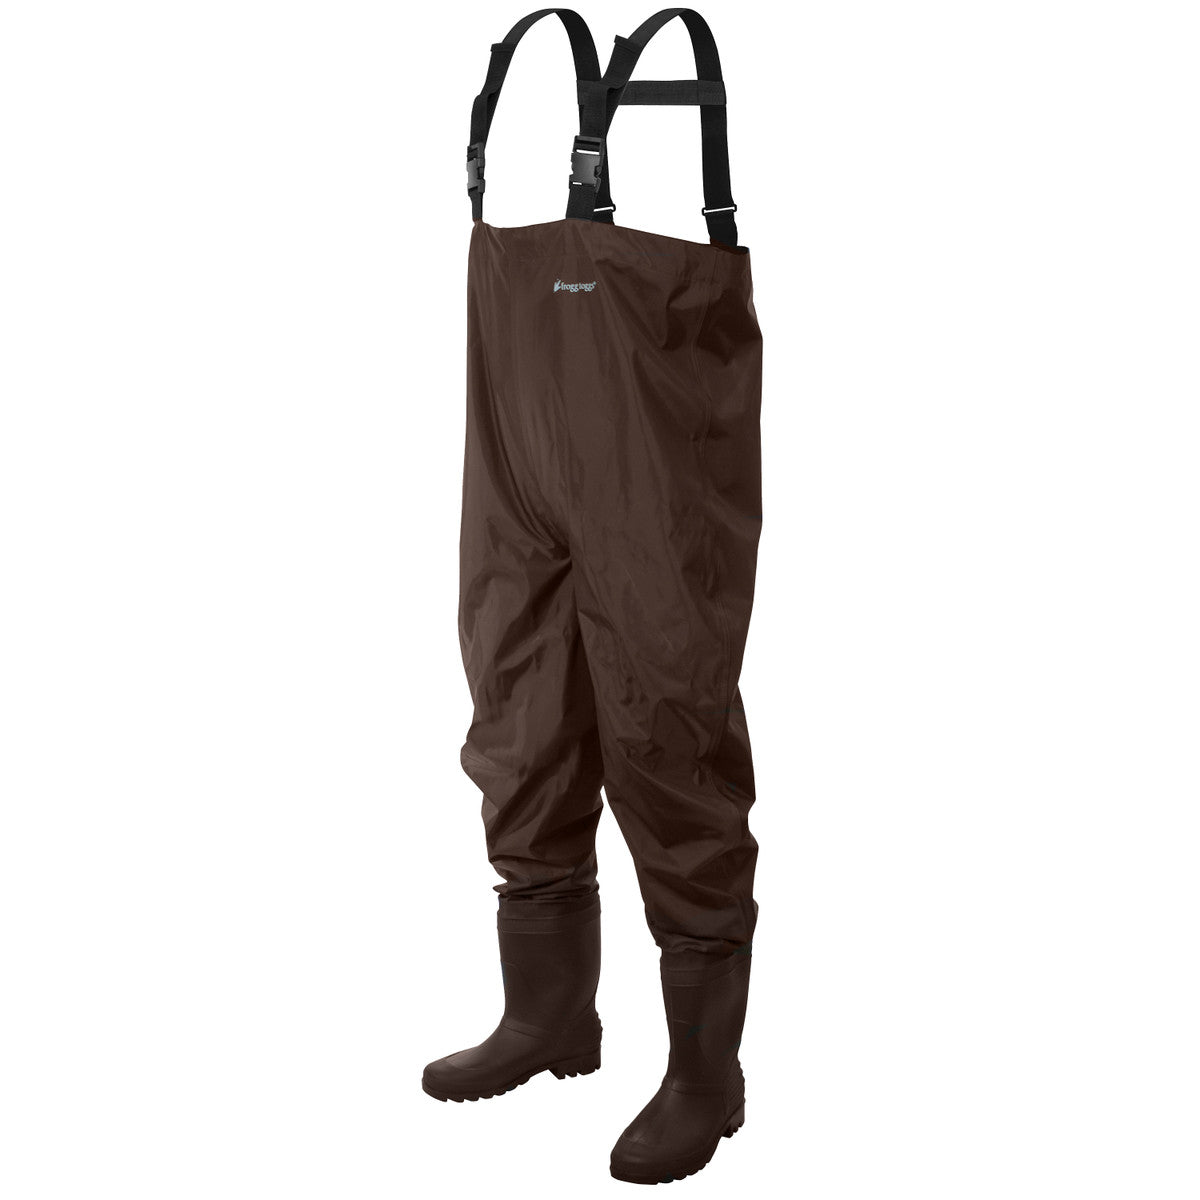 FROGG TOGGS MEN'S RANA PVC LUG CHEST WADER BROWN SIZE 12